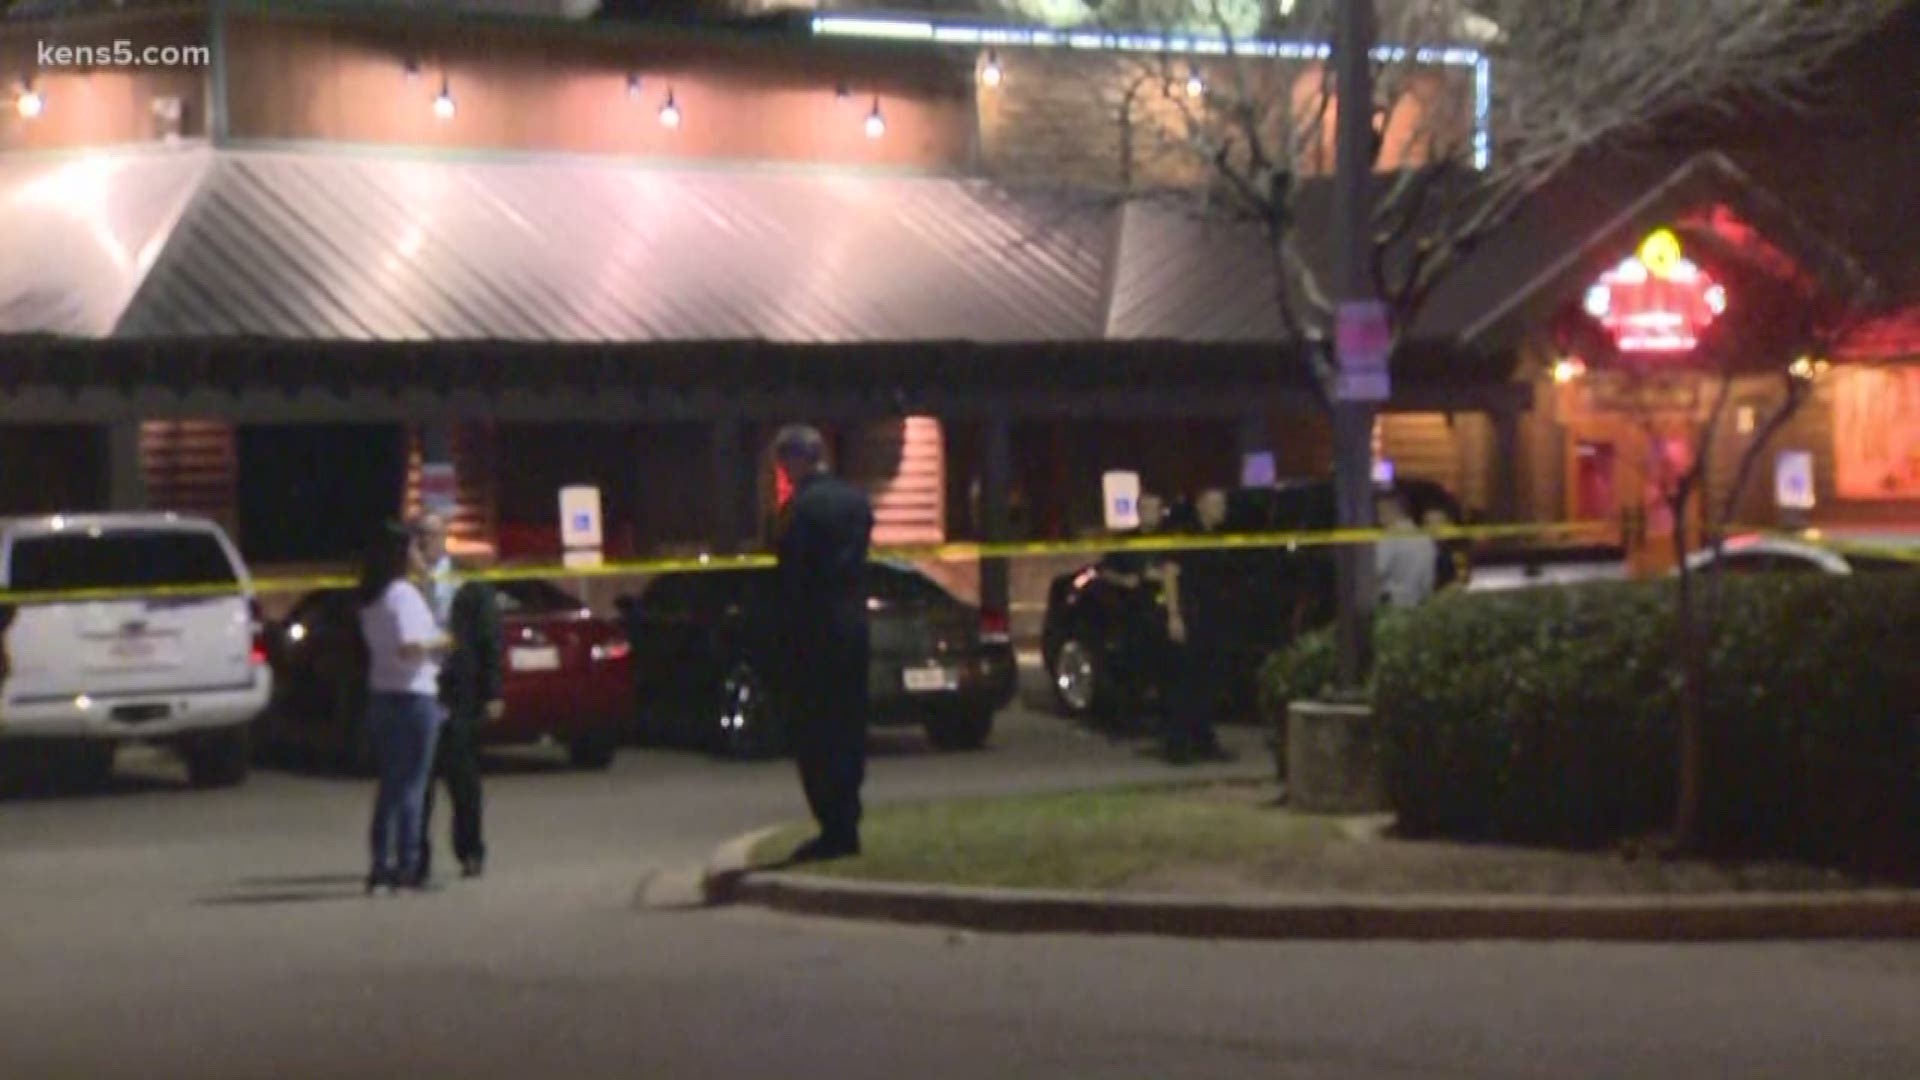 At least four people were shot in front of the Texas Roadhouse on Cinema Ridge near Ingram Road. Officials believe this was not a random shooting.